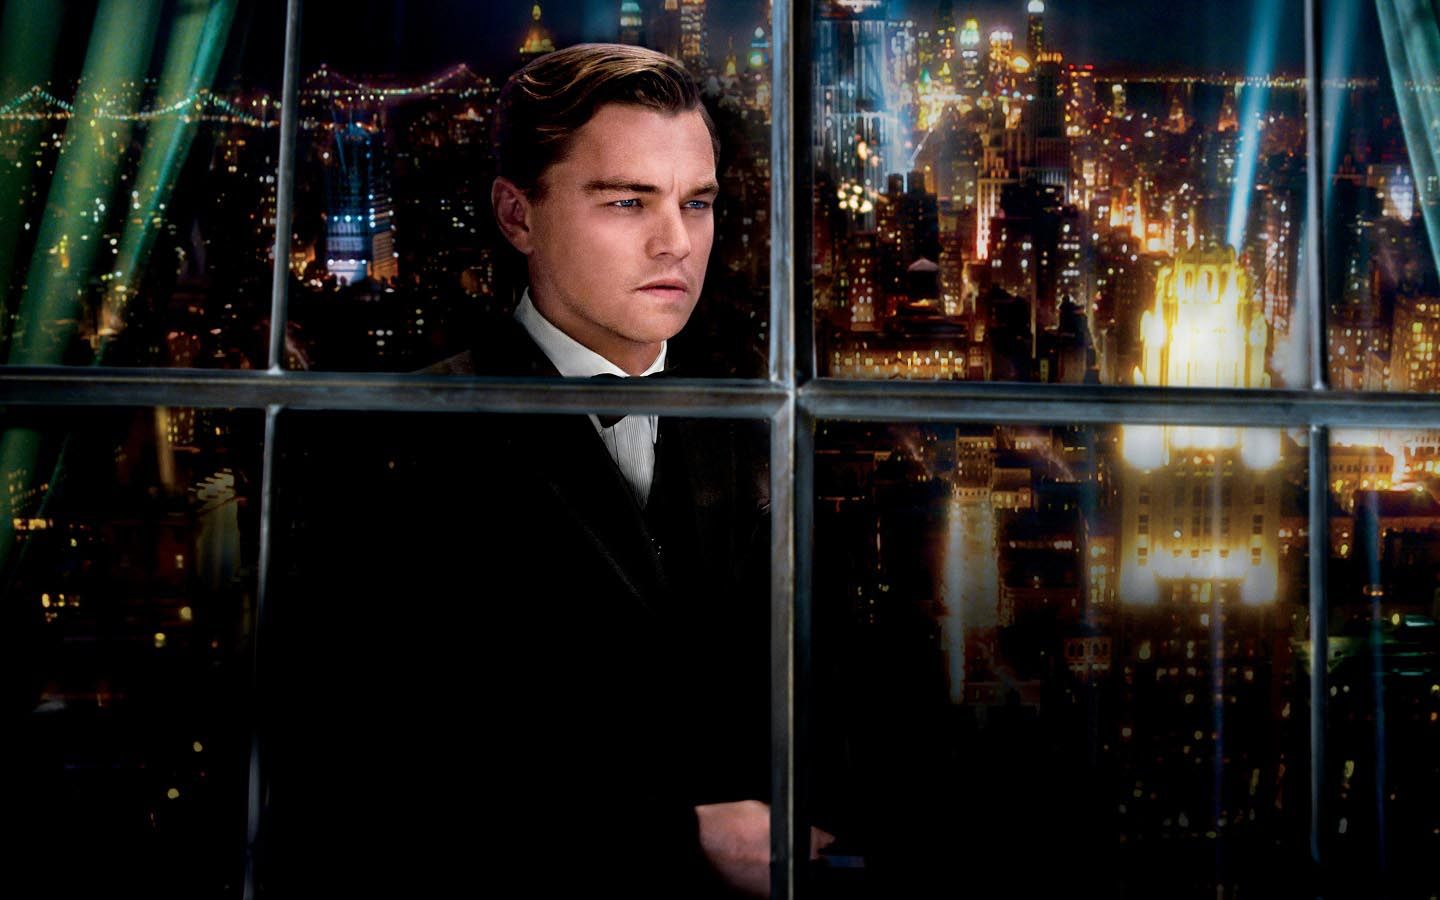 Leonardo-DiCaprio-Behind-The-Window-In-The-Great-Gatsby-Wallpapers.jpg